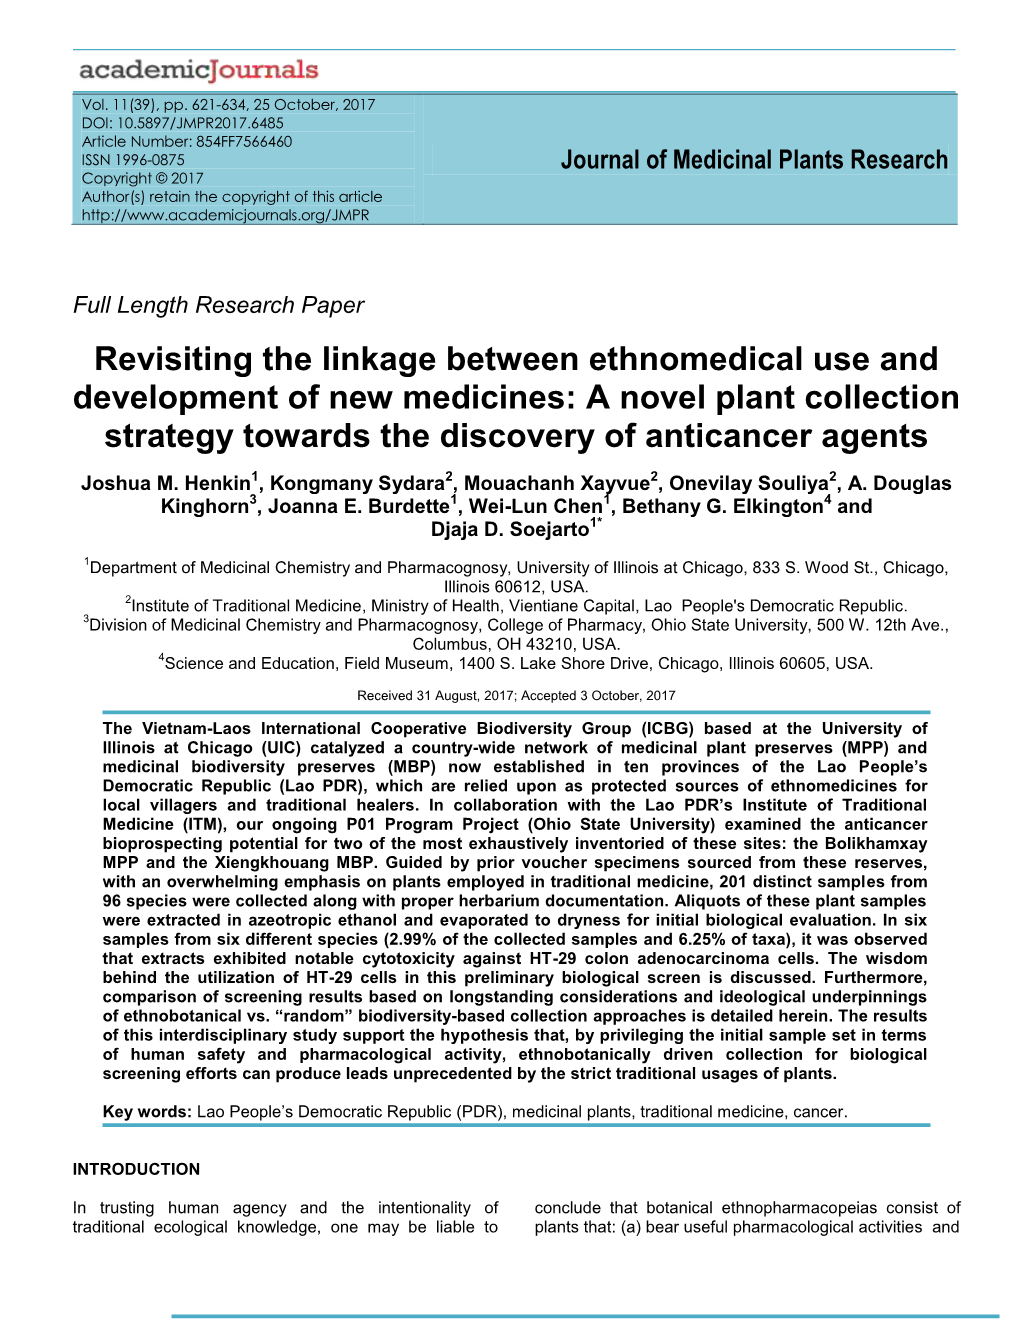 Revisiting the Linkage Between Ethnomedical Use and Development of New Medicines: a Novel Plant Collection Strategy Towards the Discovery of Anticancer Agents